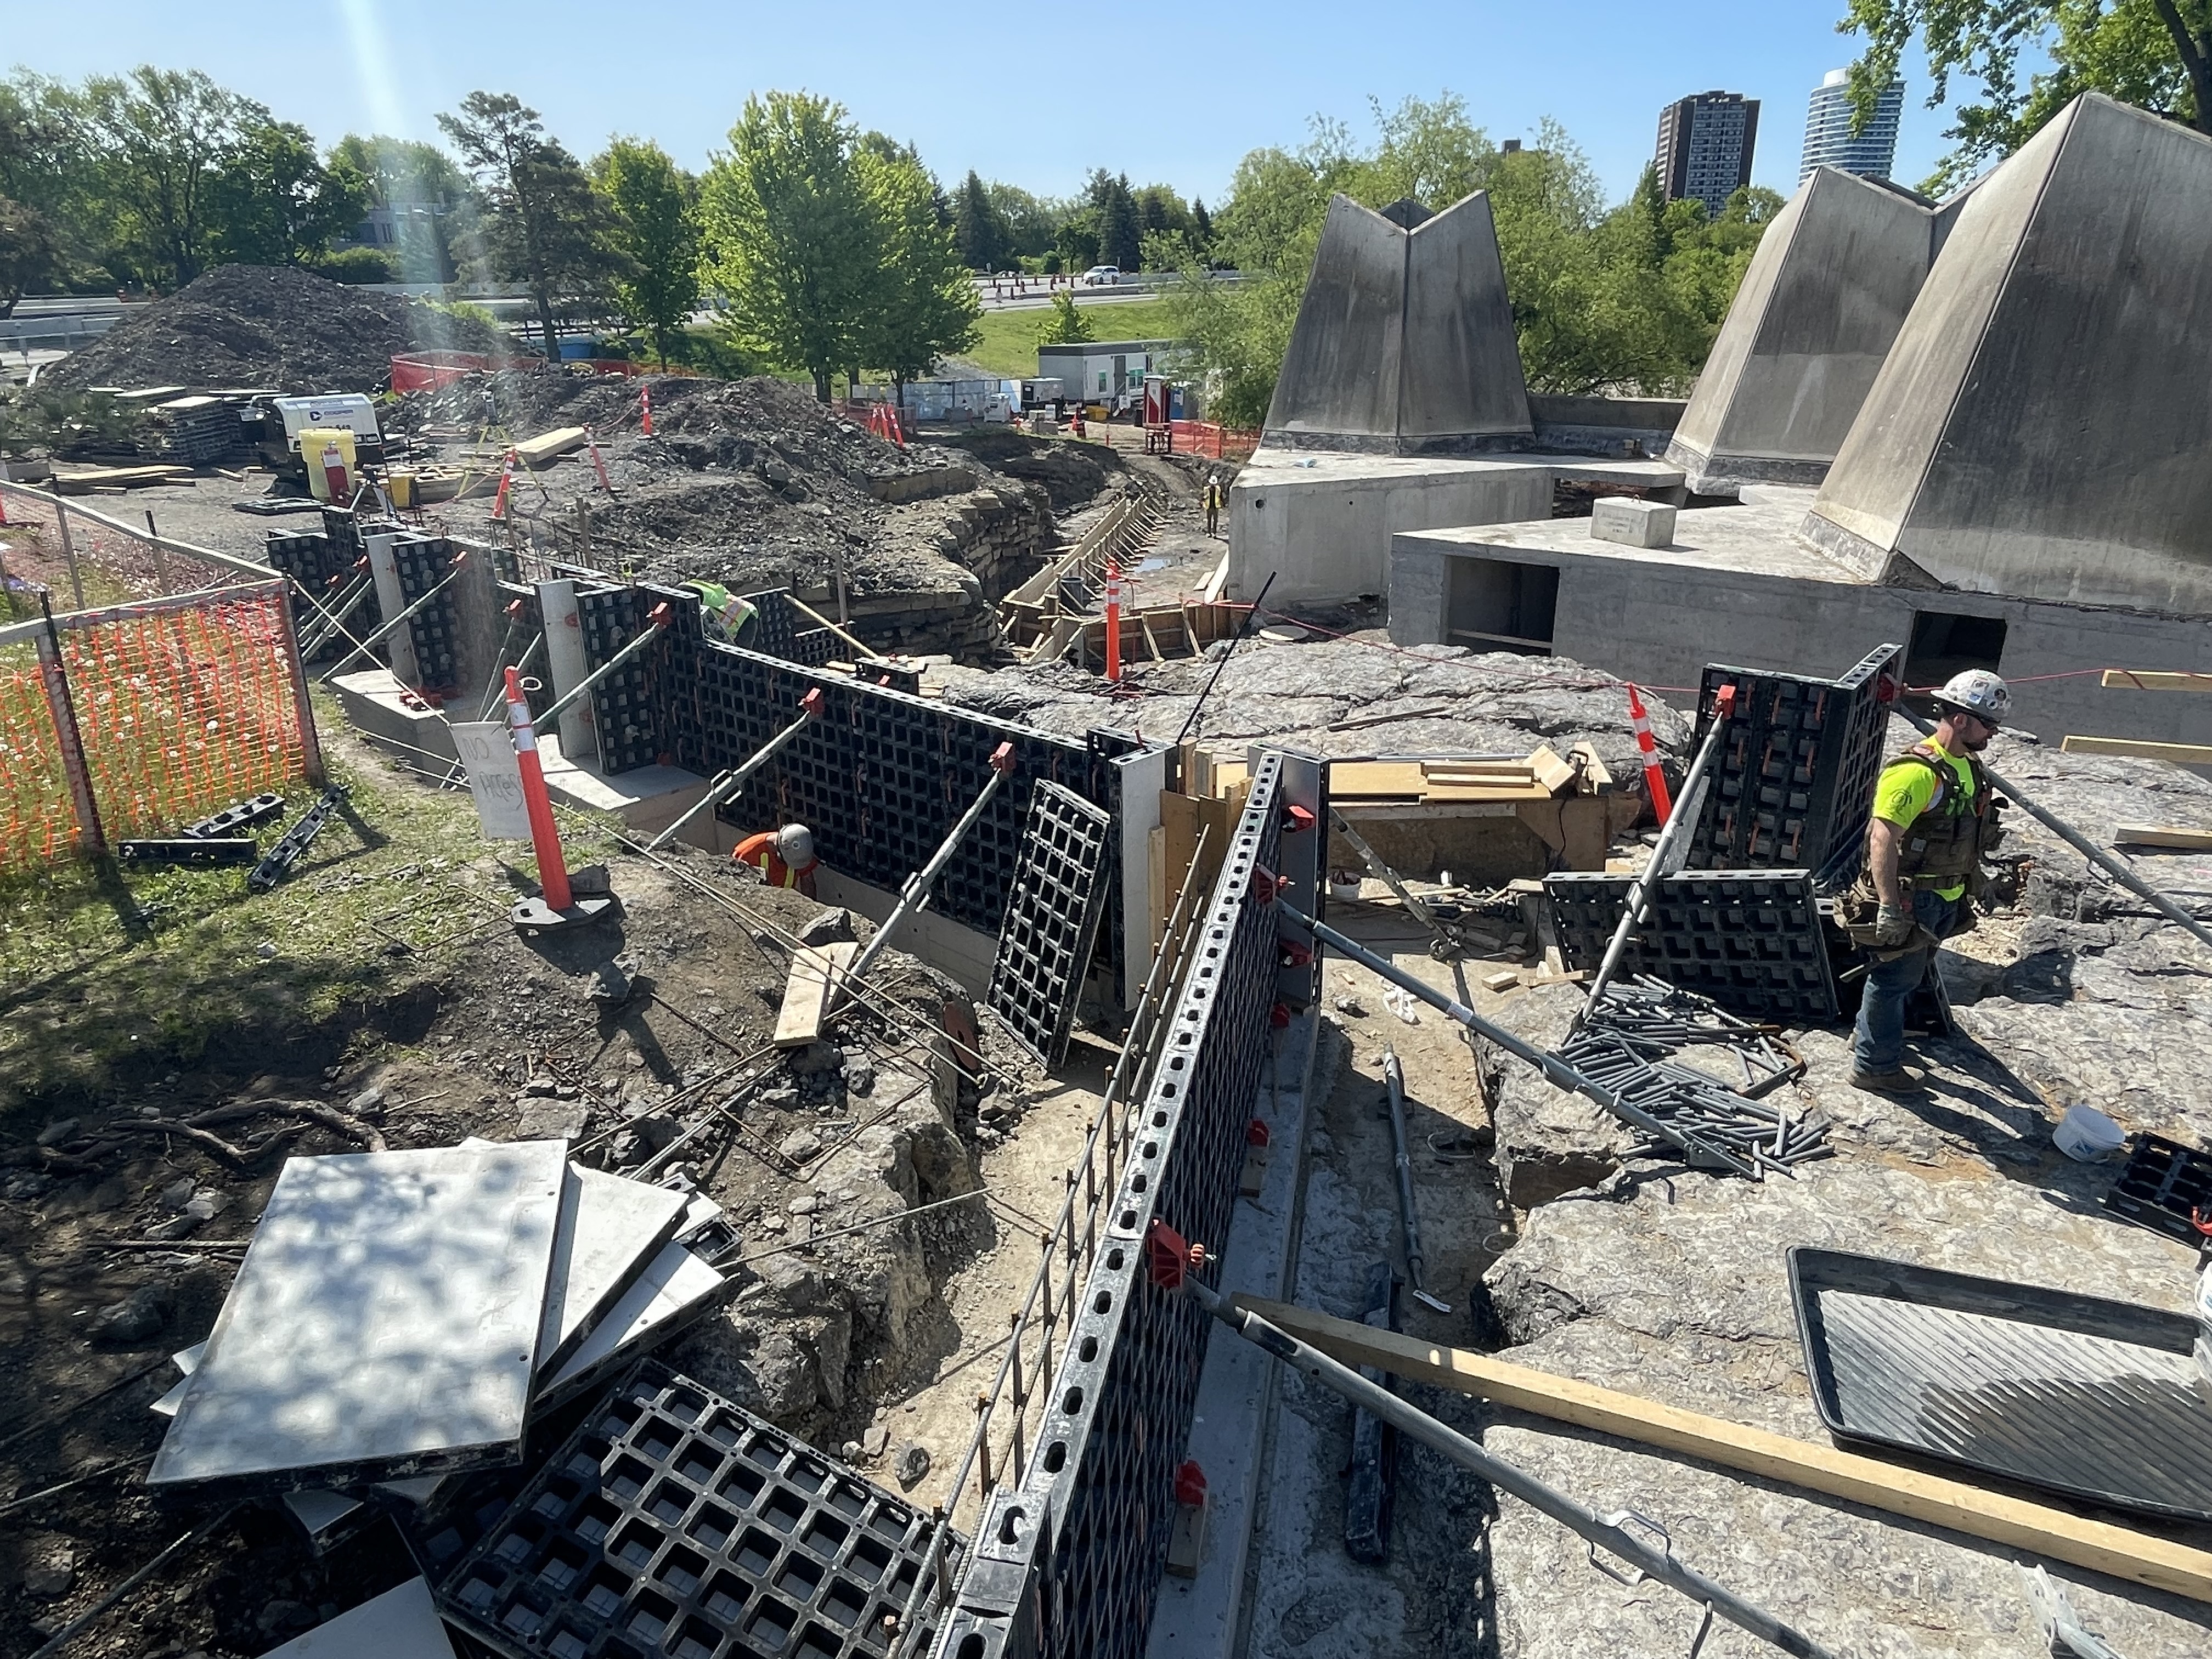 Foundation work for the new net-zero pavilion (restaurant and community space)